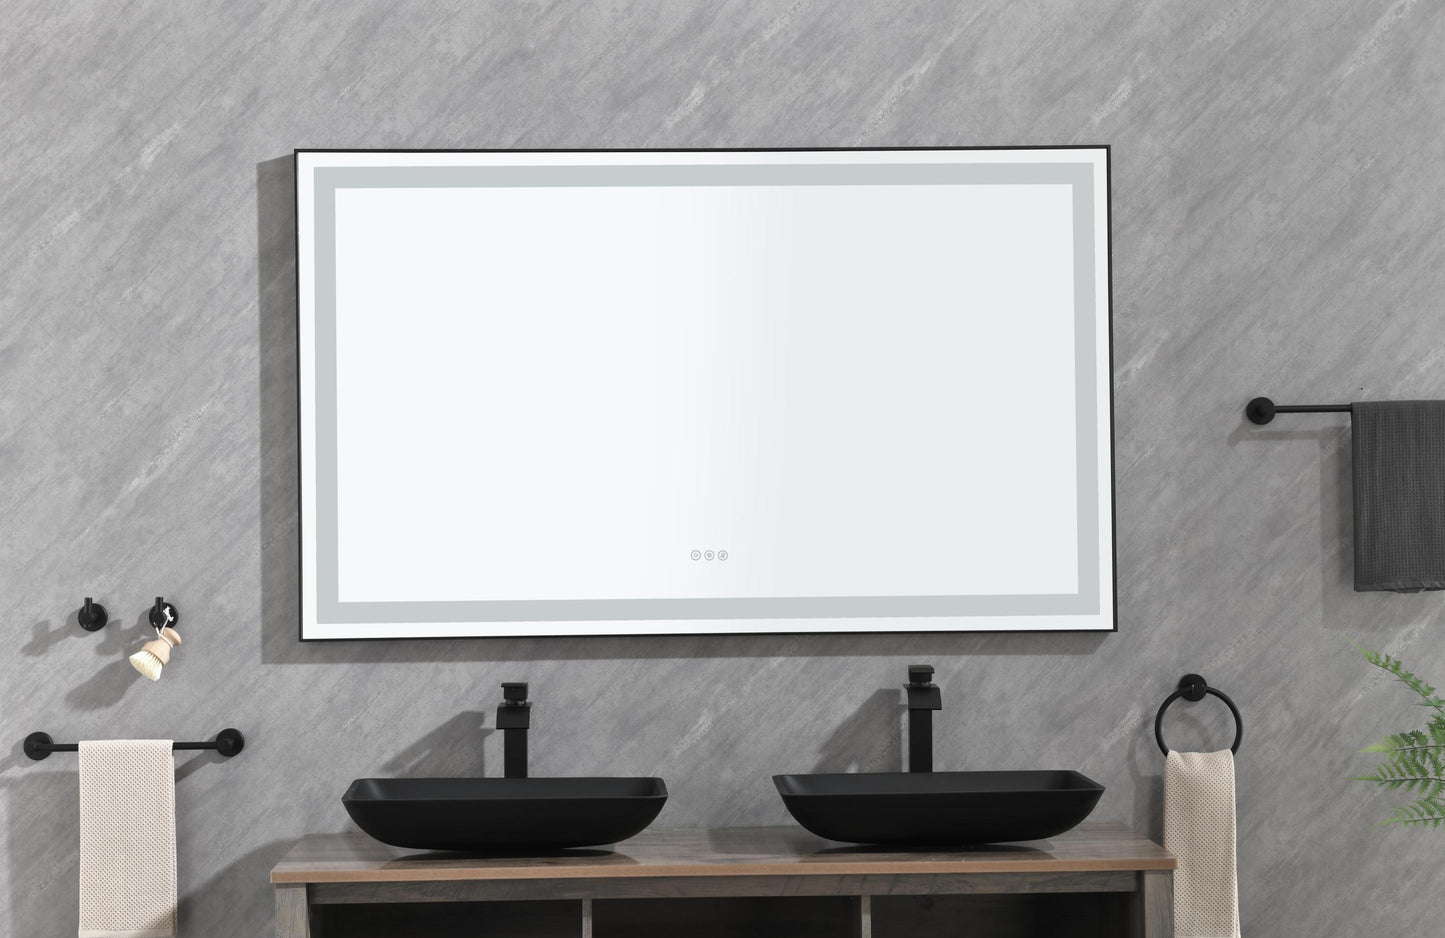 LTL needs to consult the warehouse address 84*36 LED Lighted Bathroom Wall Mounted Mirror with High Lumen+Anti-Fog Separately Control